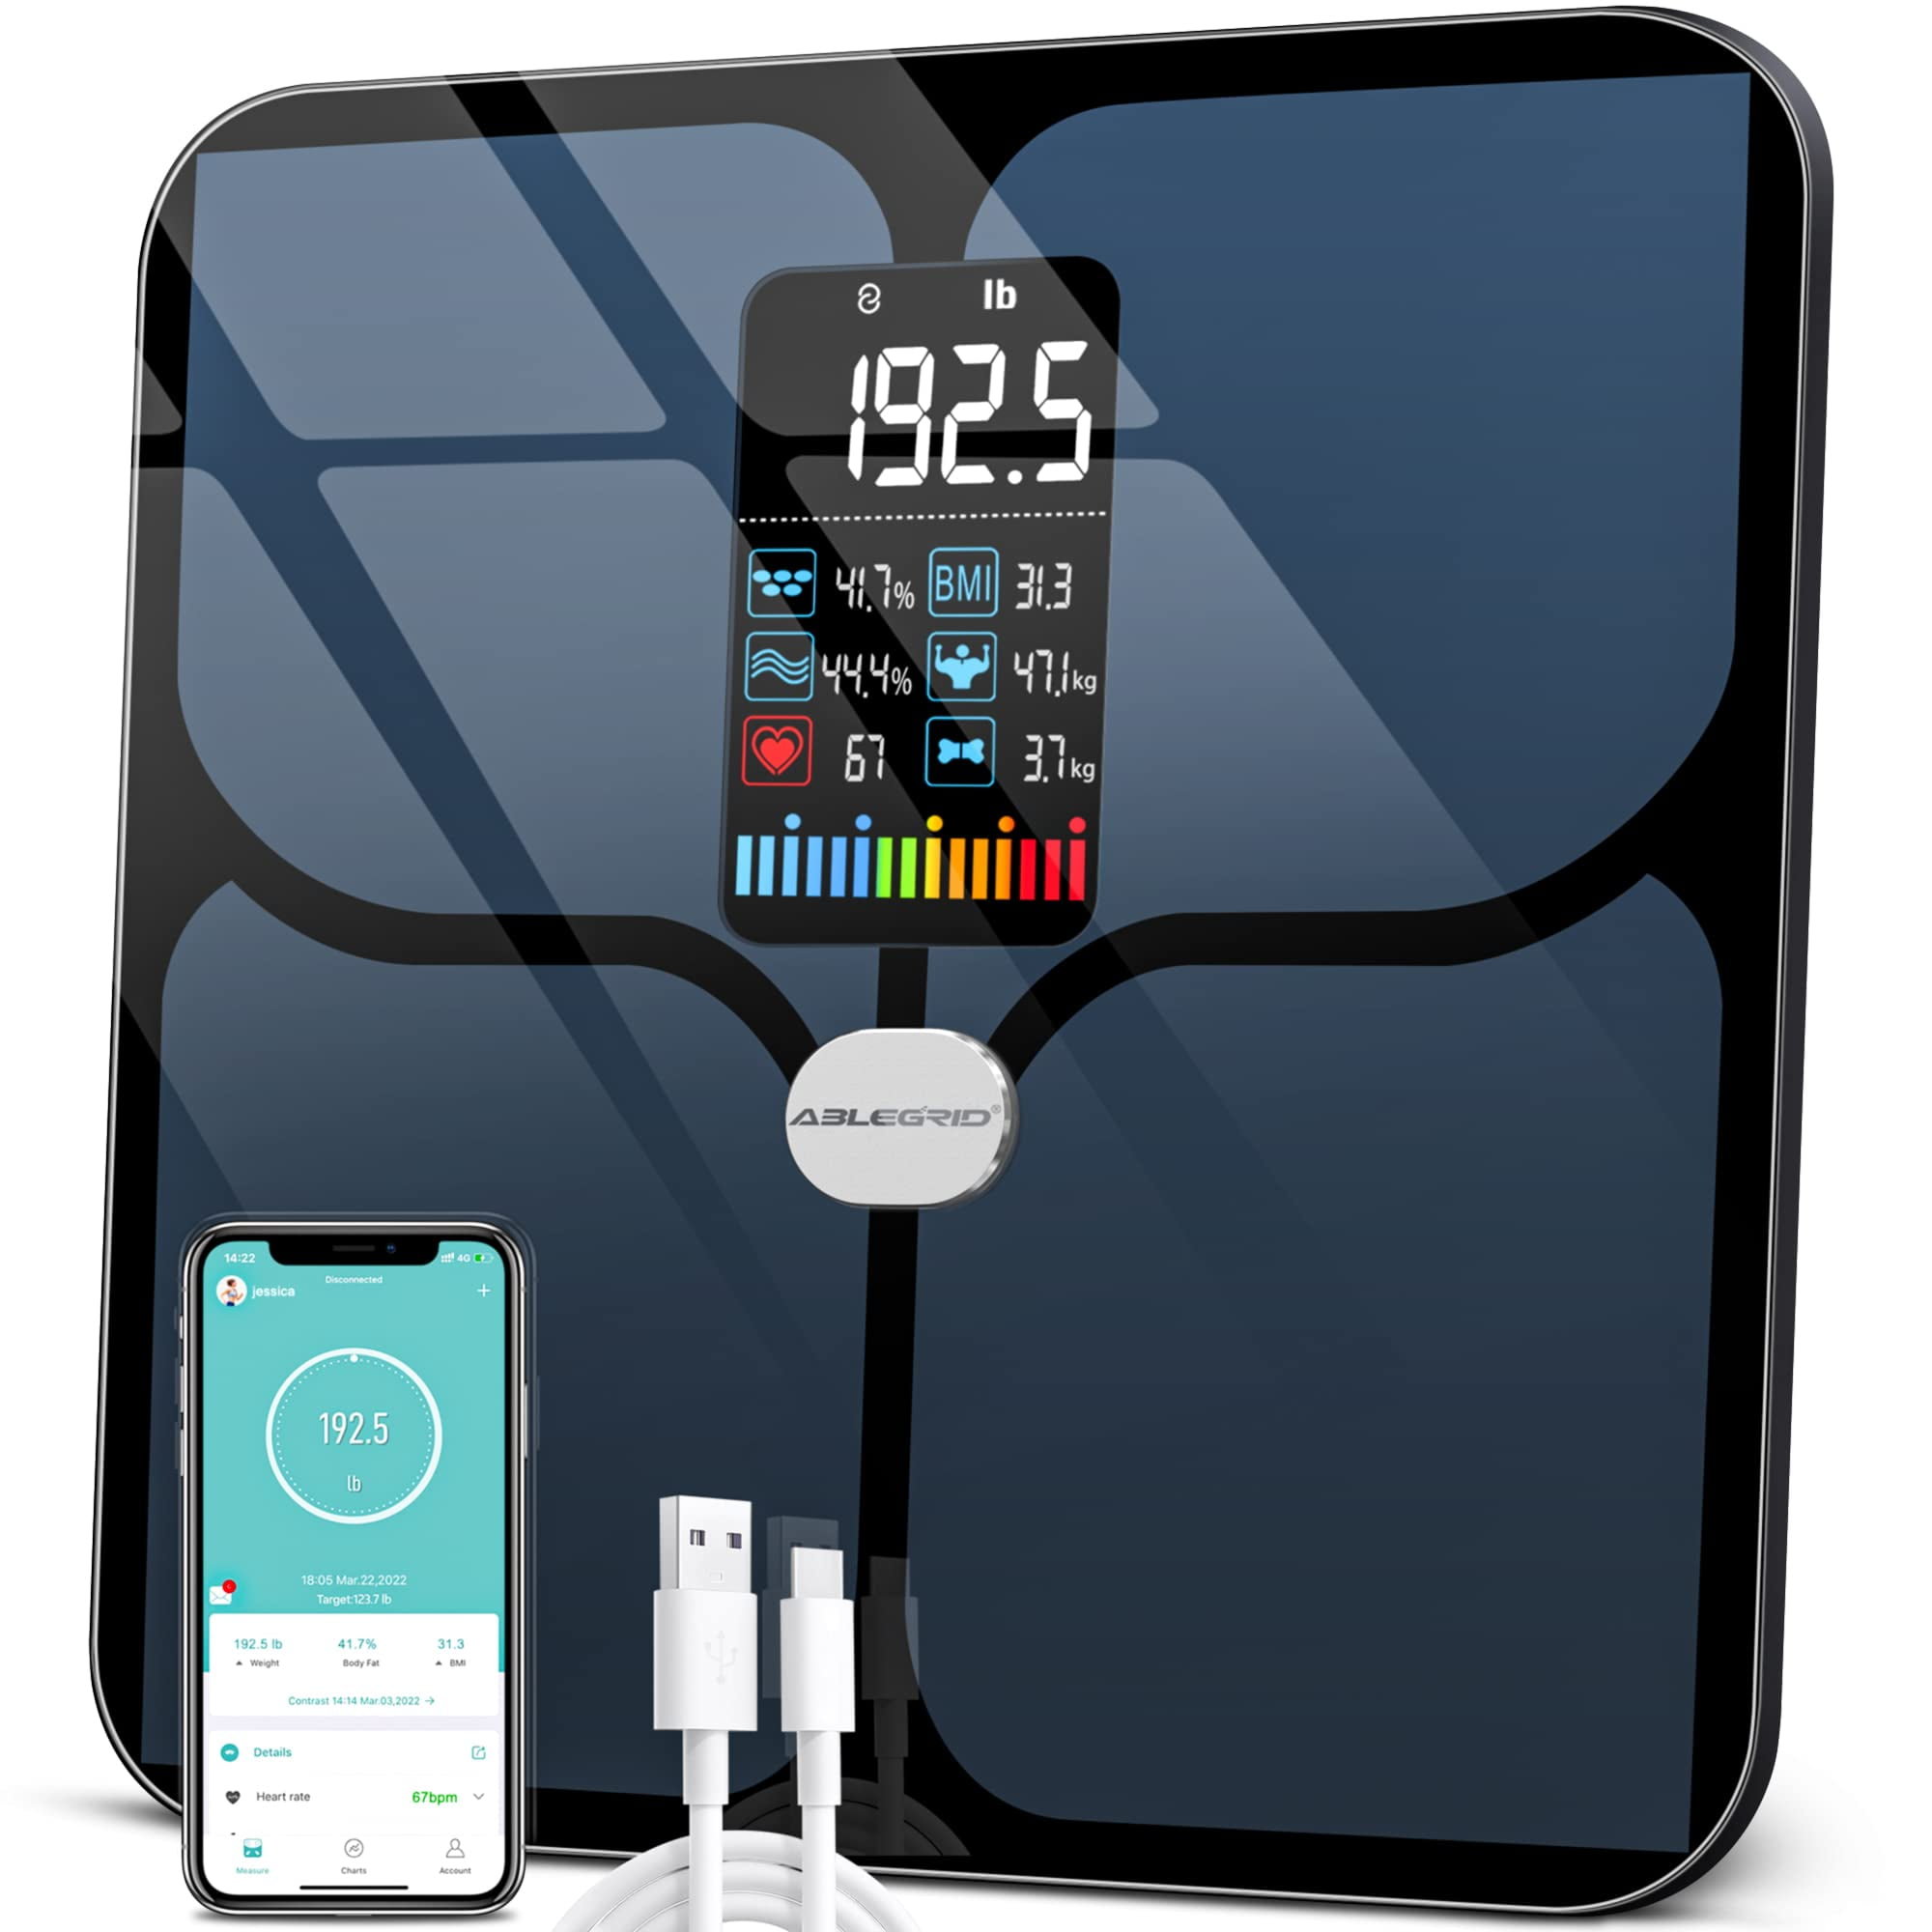  GE Smart Scale for Body Weight and Fat Percentage with  All-in-one LCD Display, Digital Bathroom Weight Scales Bluetooth  Rechargeable Body Fat Scale, Accurate Weighing Scale, 396 lbs : Health &  Household